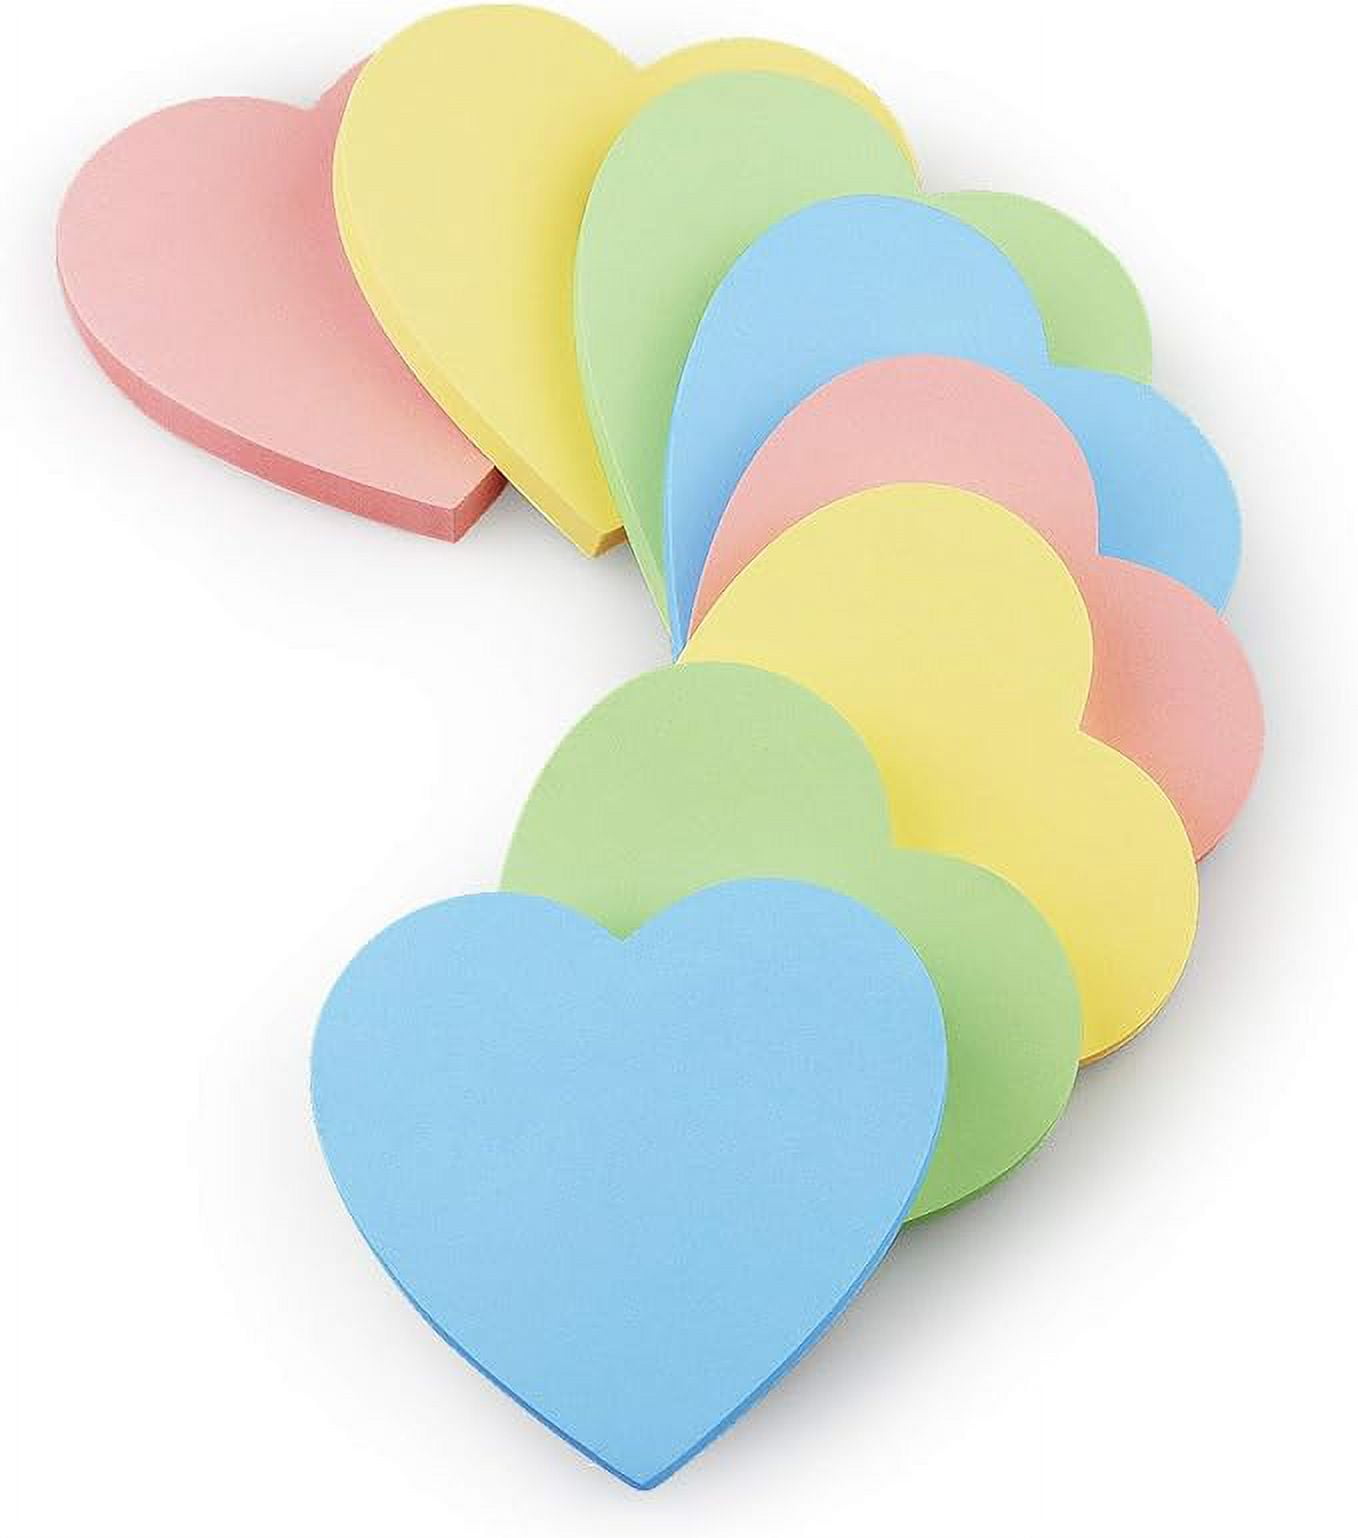 Cloud shaped post it notes / sticky notes. , 3 sizes